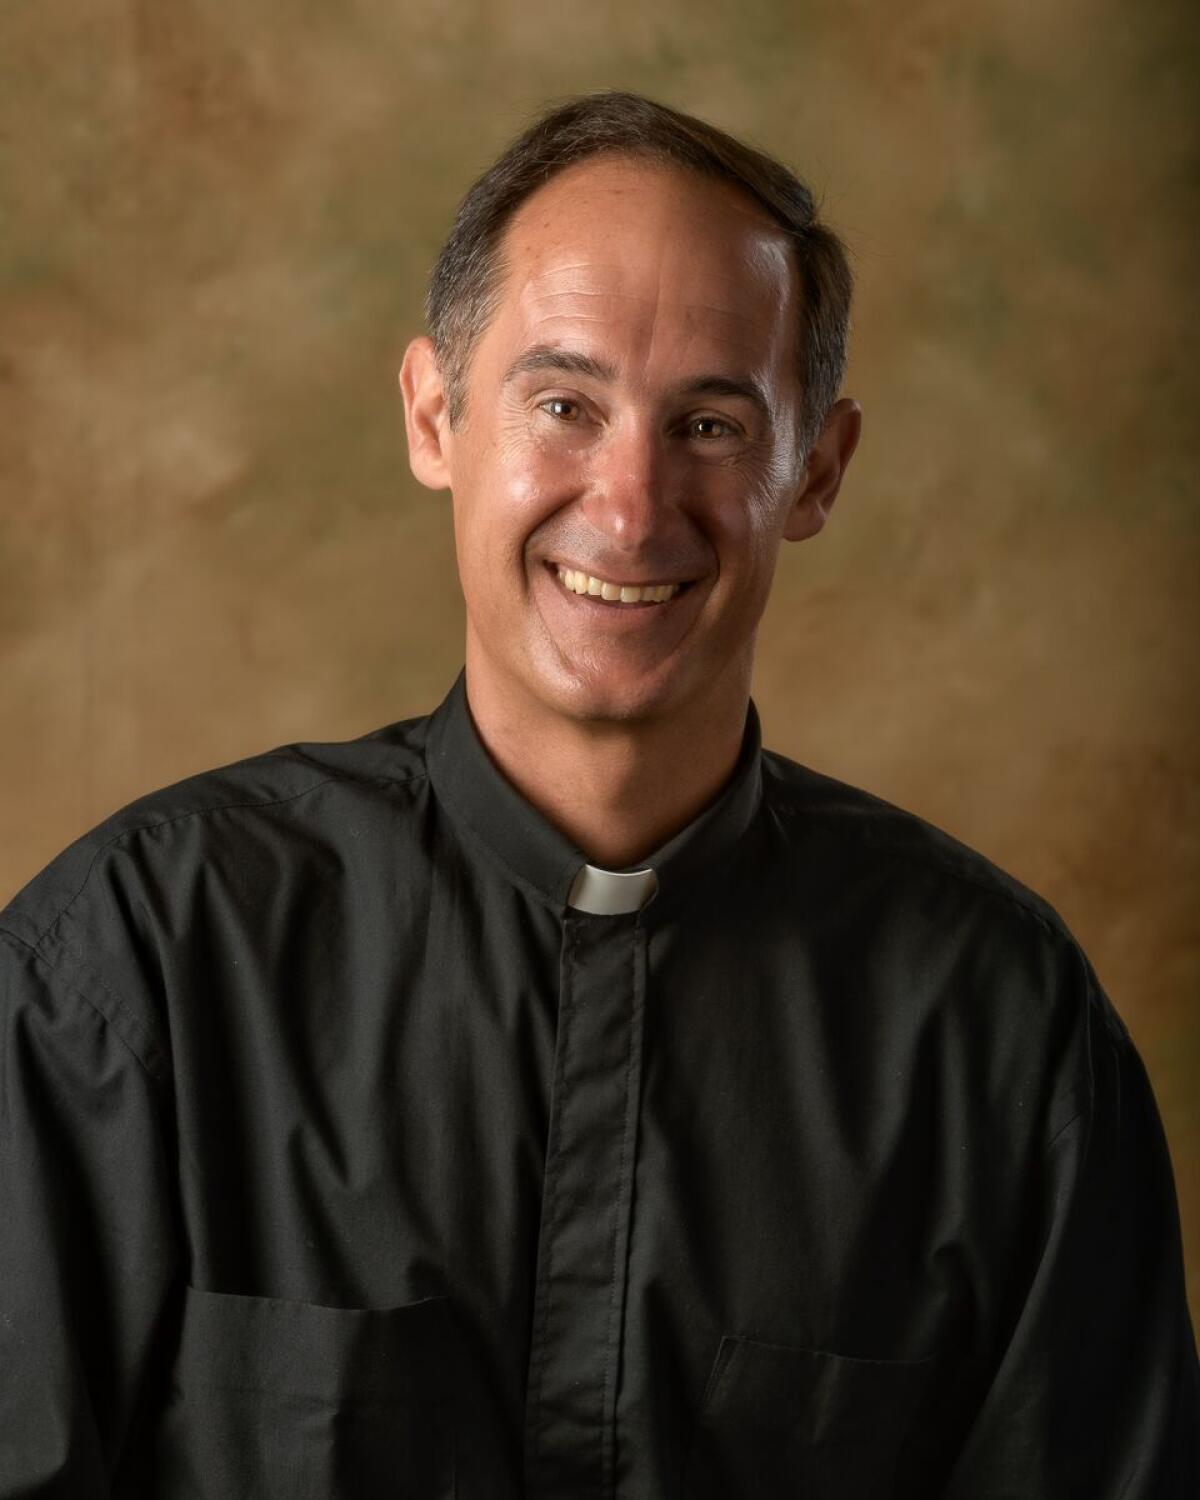 Robert Capone is a parish priest of the Diocese of Orange currently serving as a chaplain at the University of San Diego.